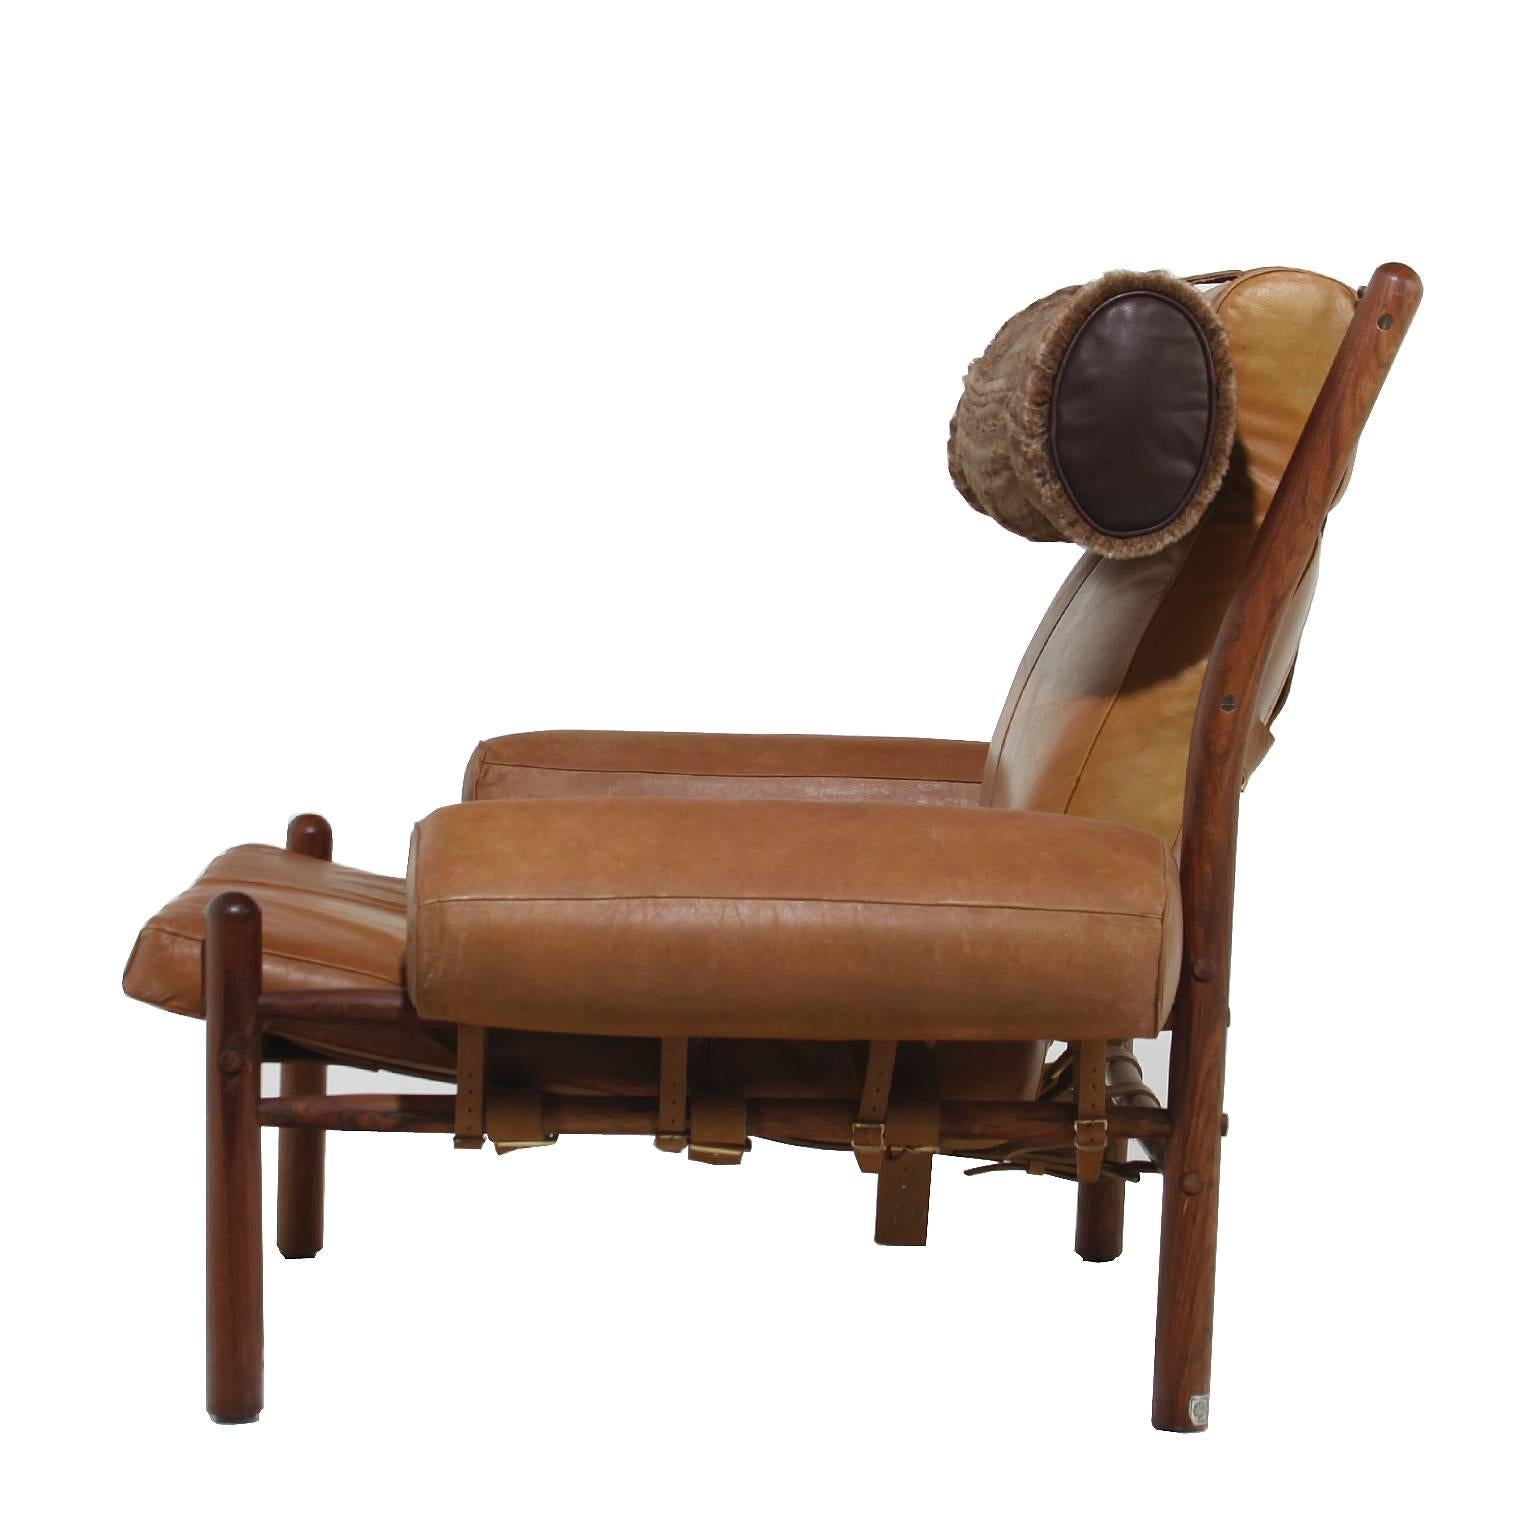 Brazilian Armchair and Ottoman with Cognac Leather and Faux Fur Pillow by Arne Norell